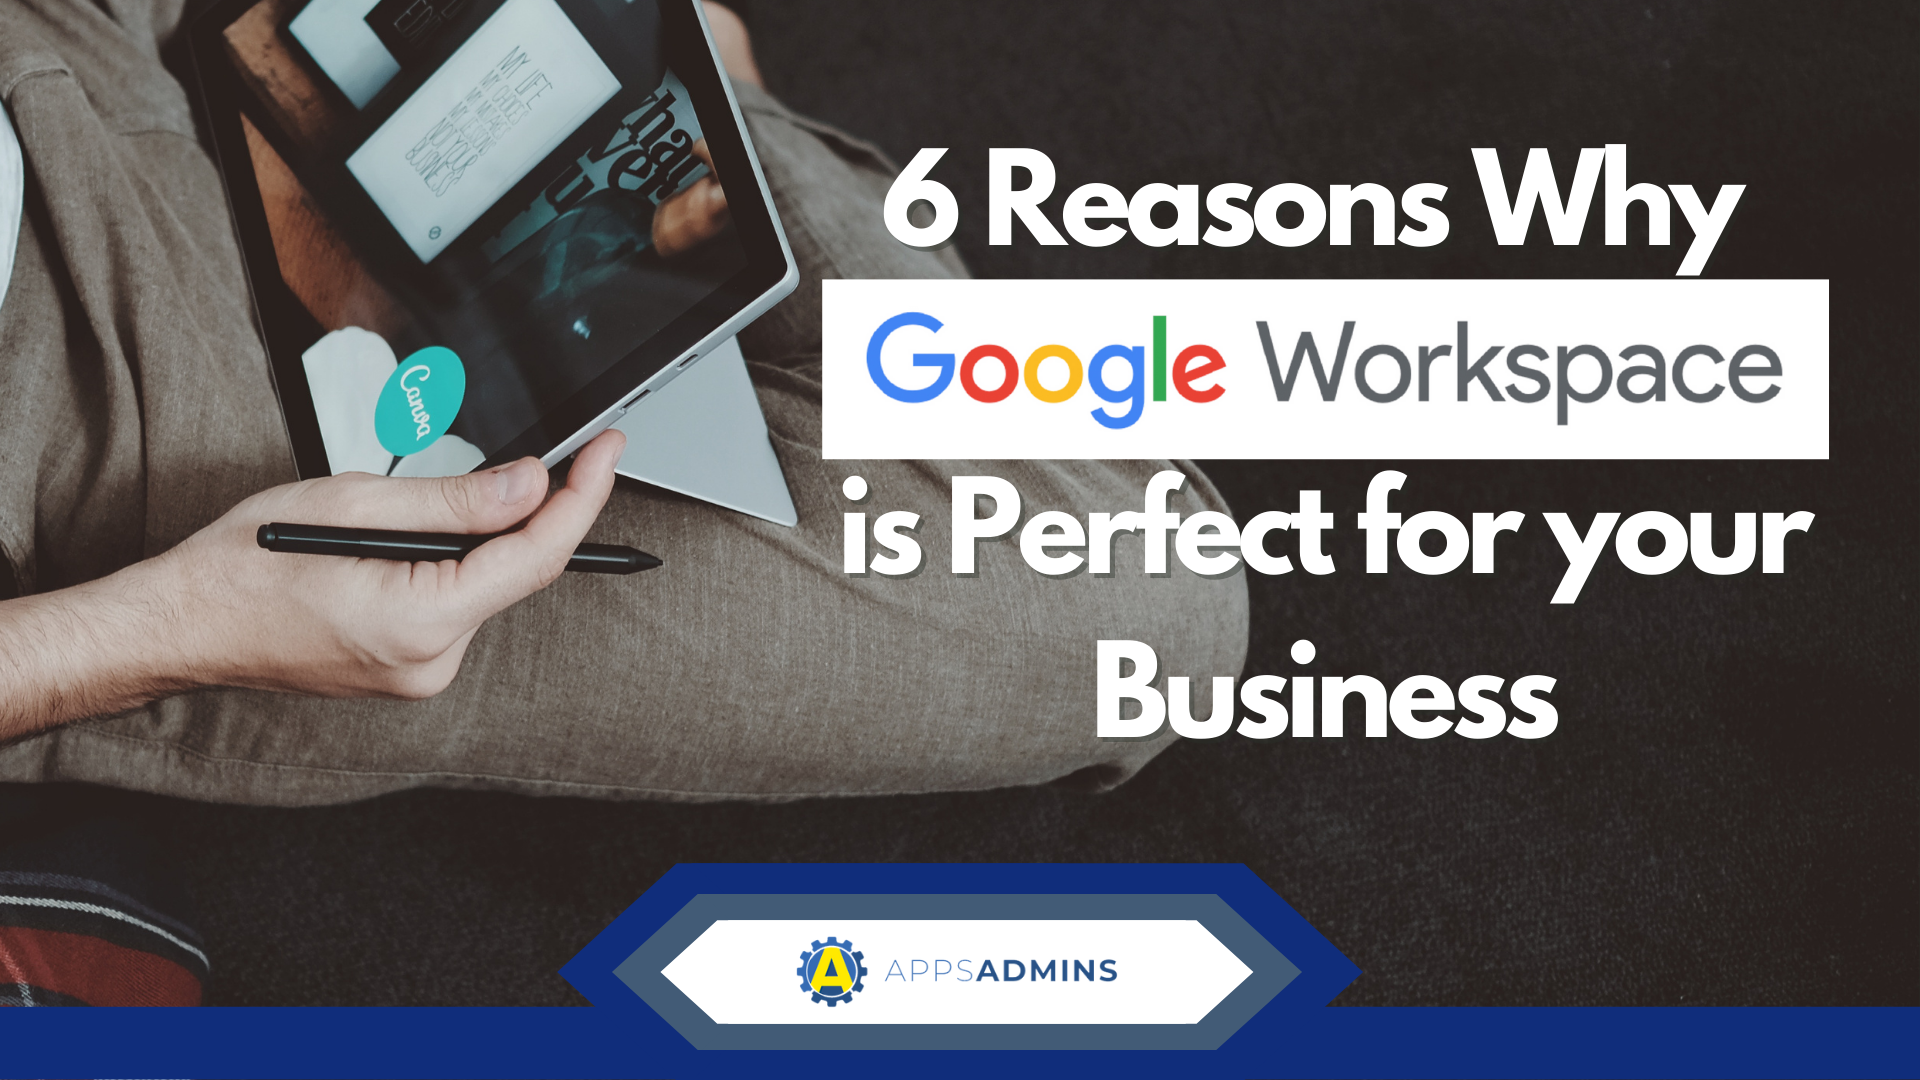 6 Reasons Why Google Workspace is Perfect for your Business